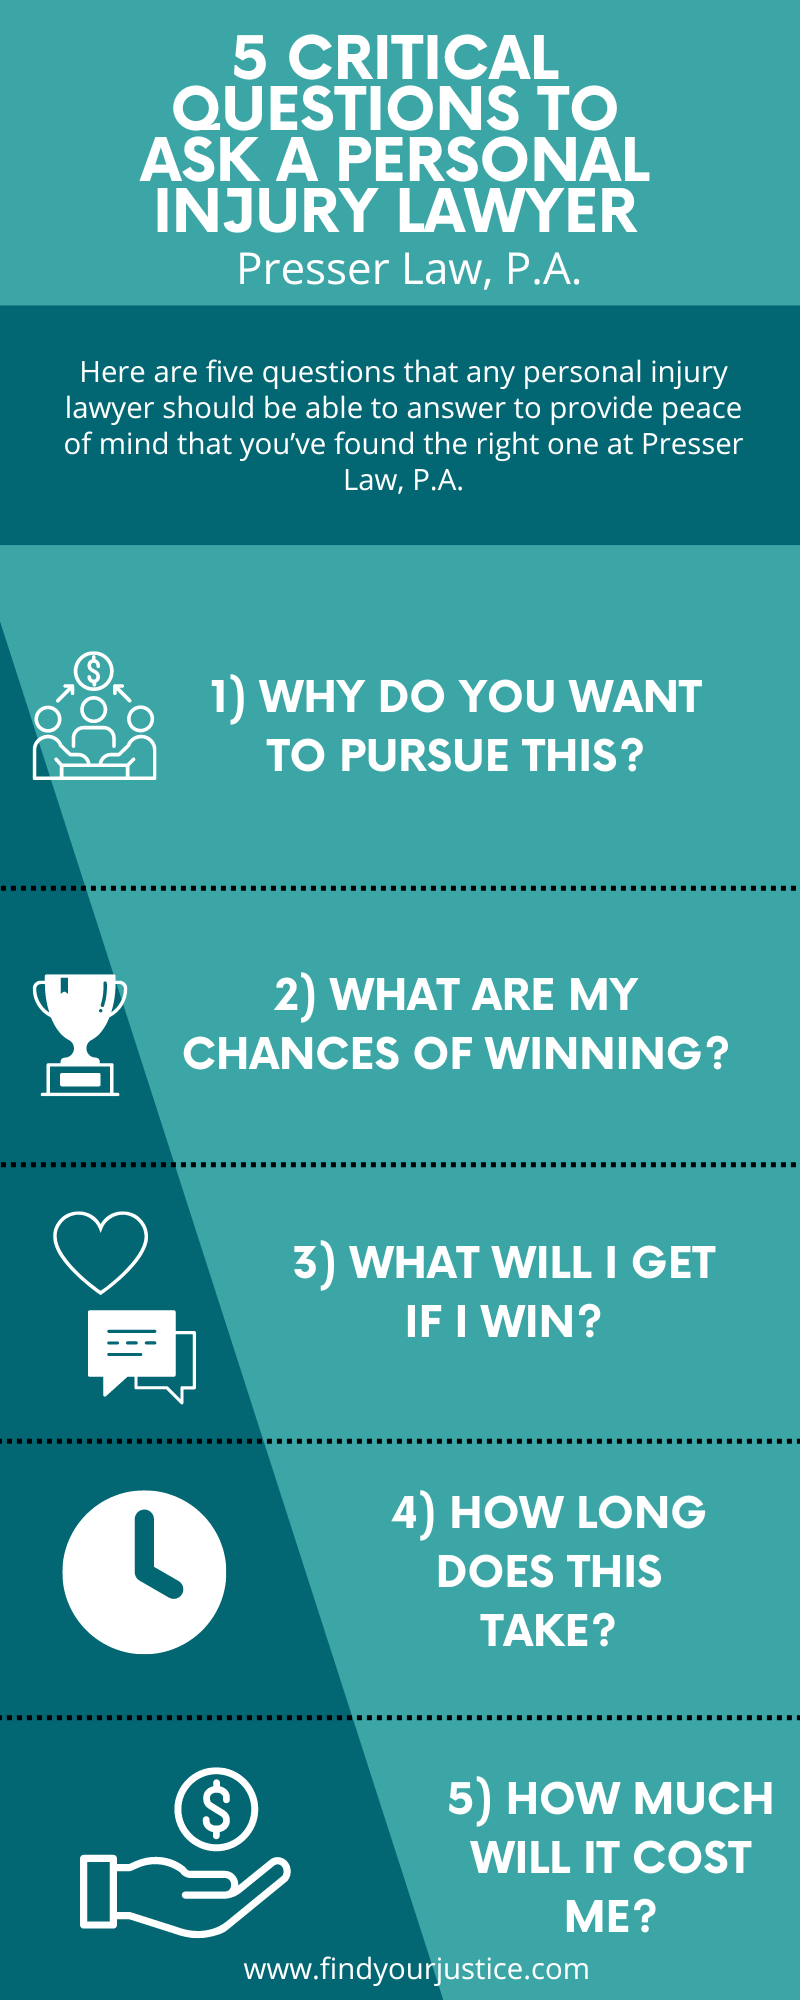 5 Critical Questions to Ask a Personal Injury Lawyer Infographic